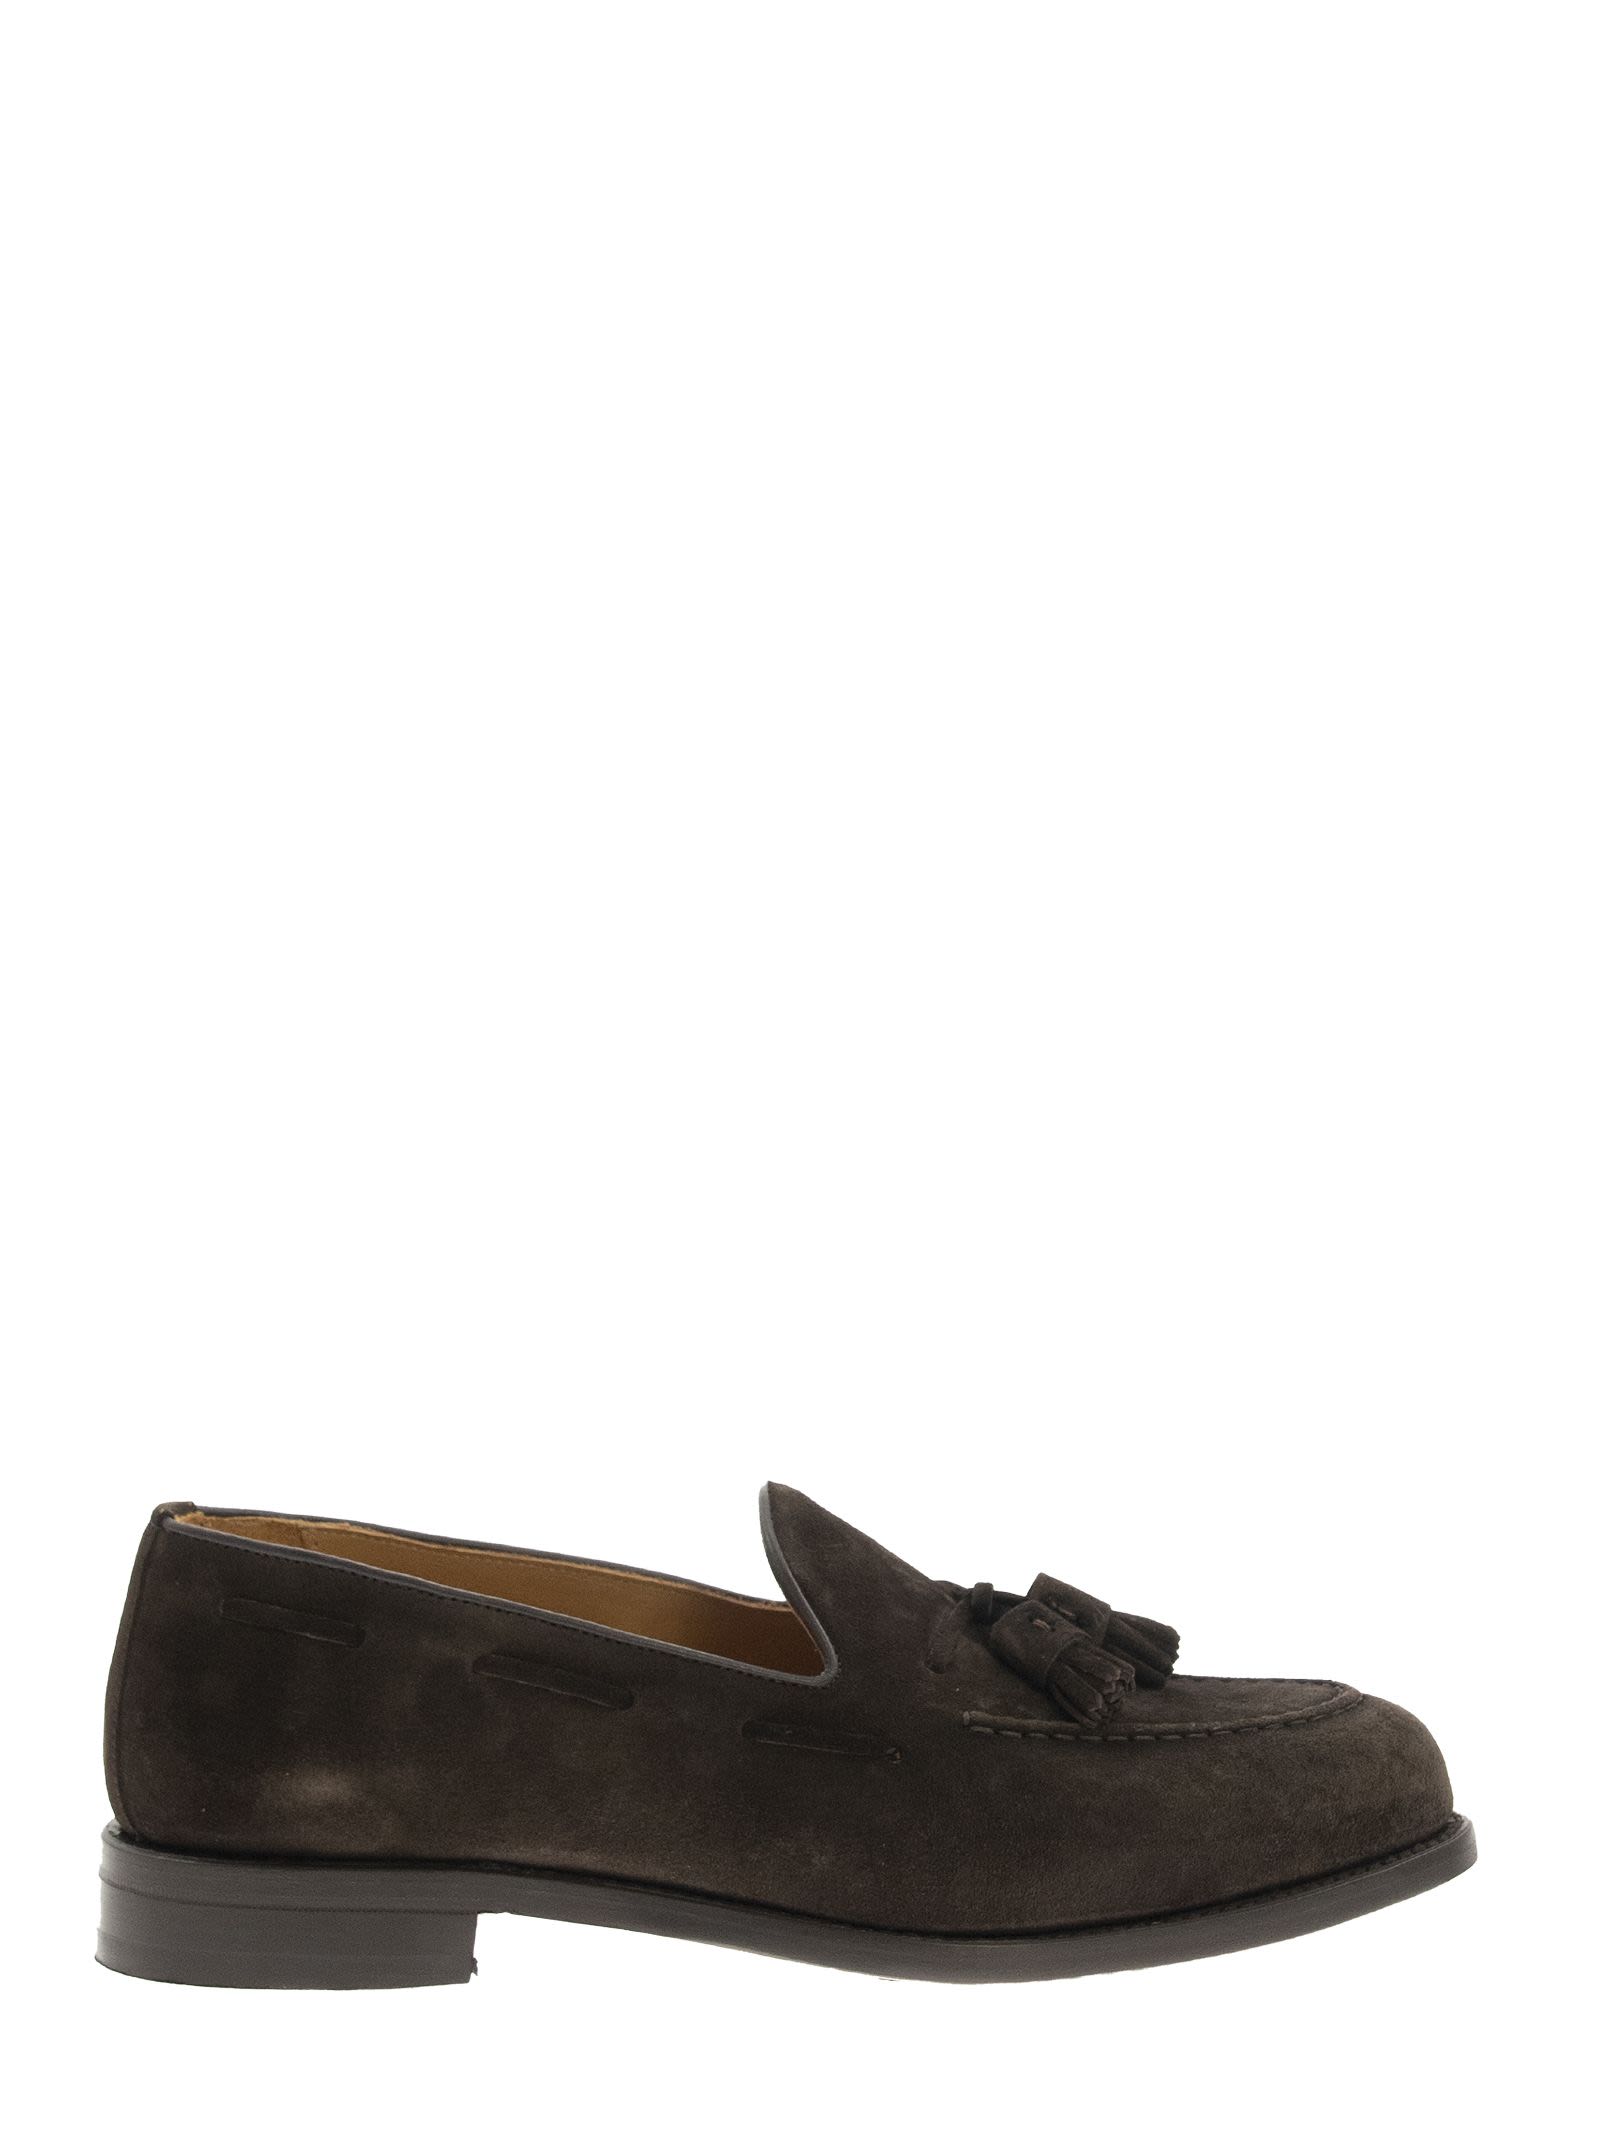 BERWICK 8491 Loafer with Suede Tassels - Bellettini.com